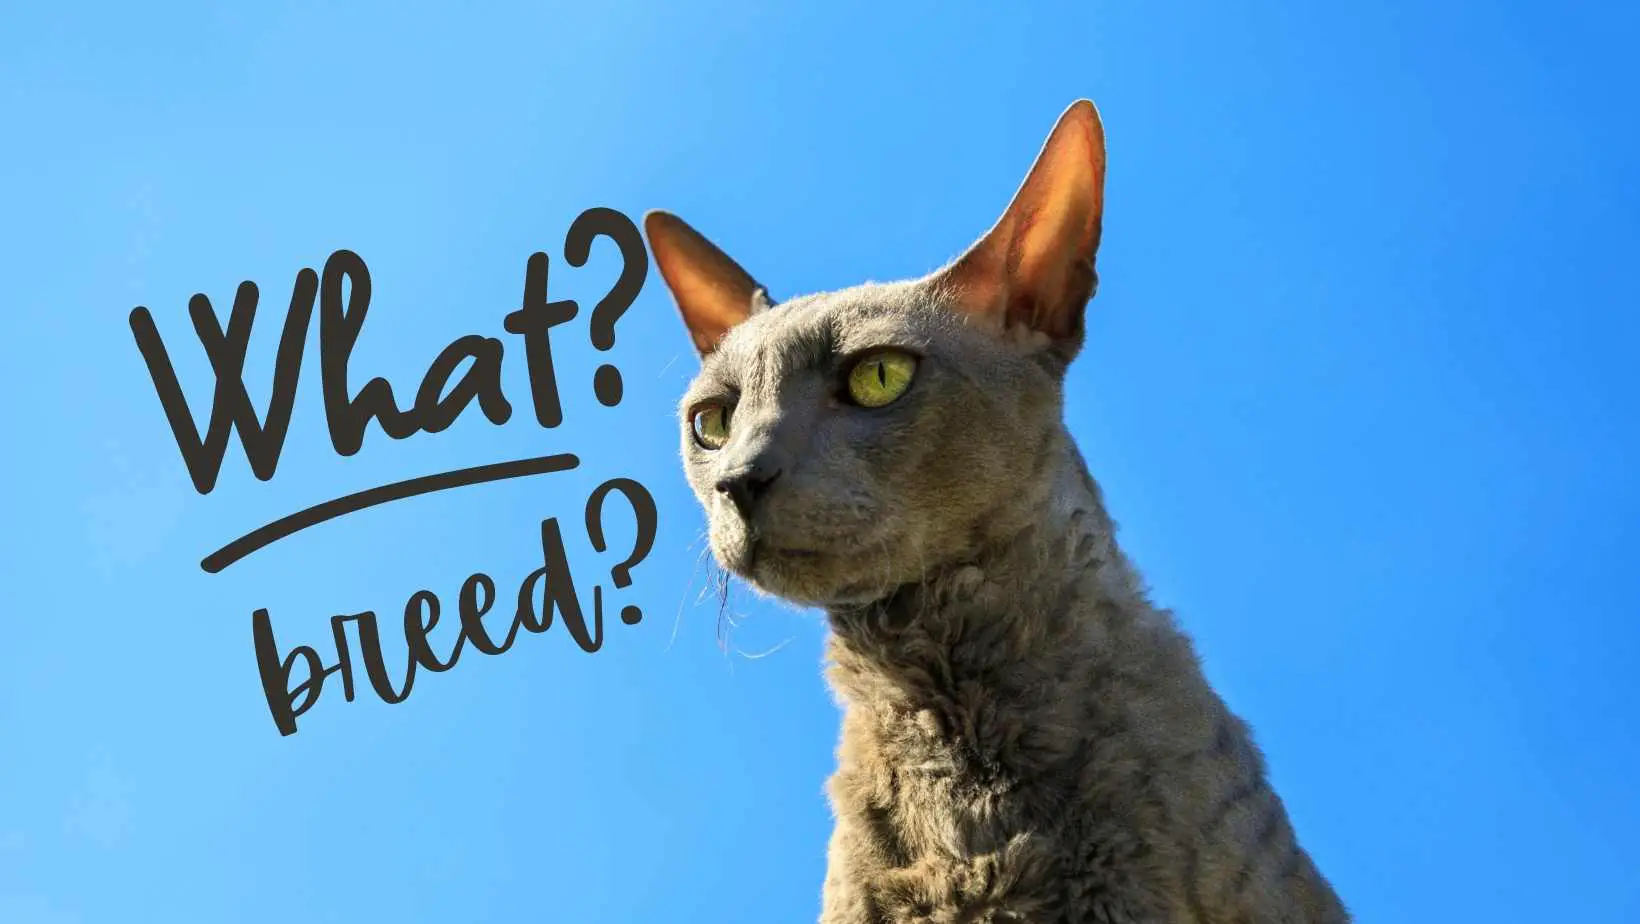 How to tell what breed my cat is? The best way to know your cat breed